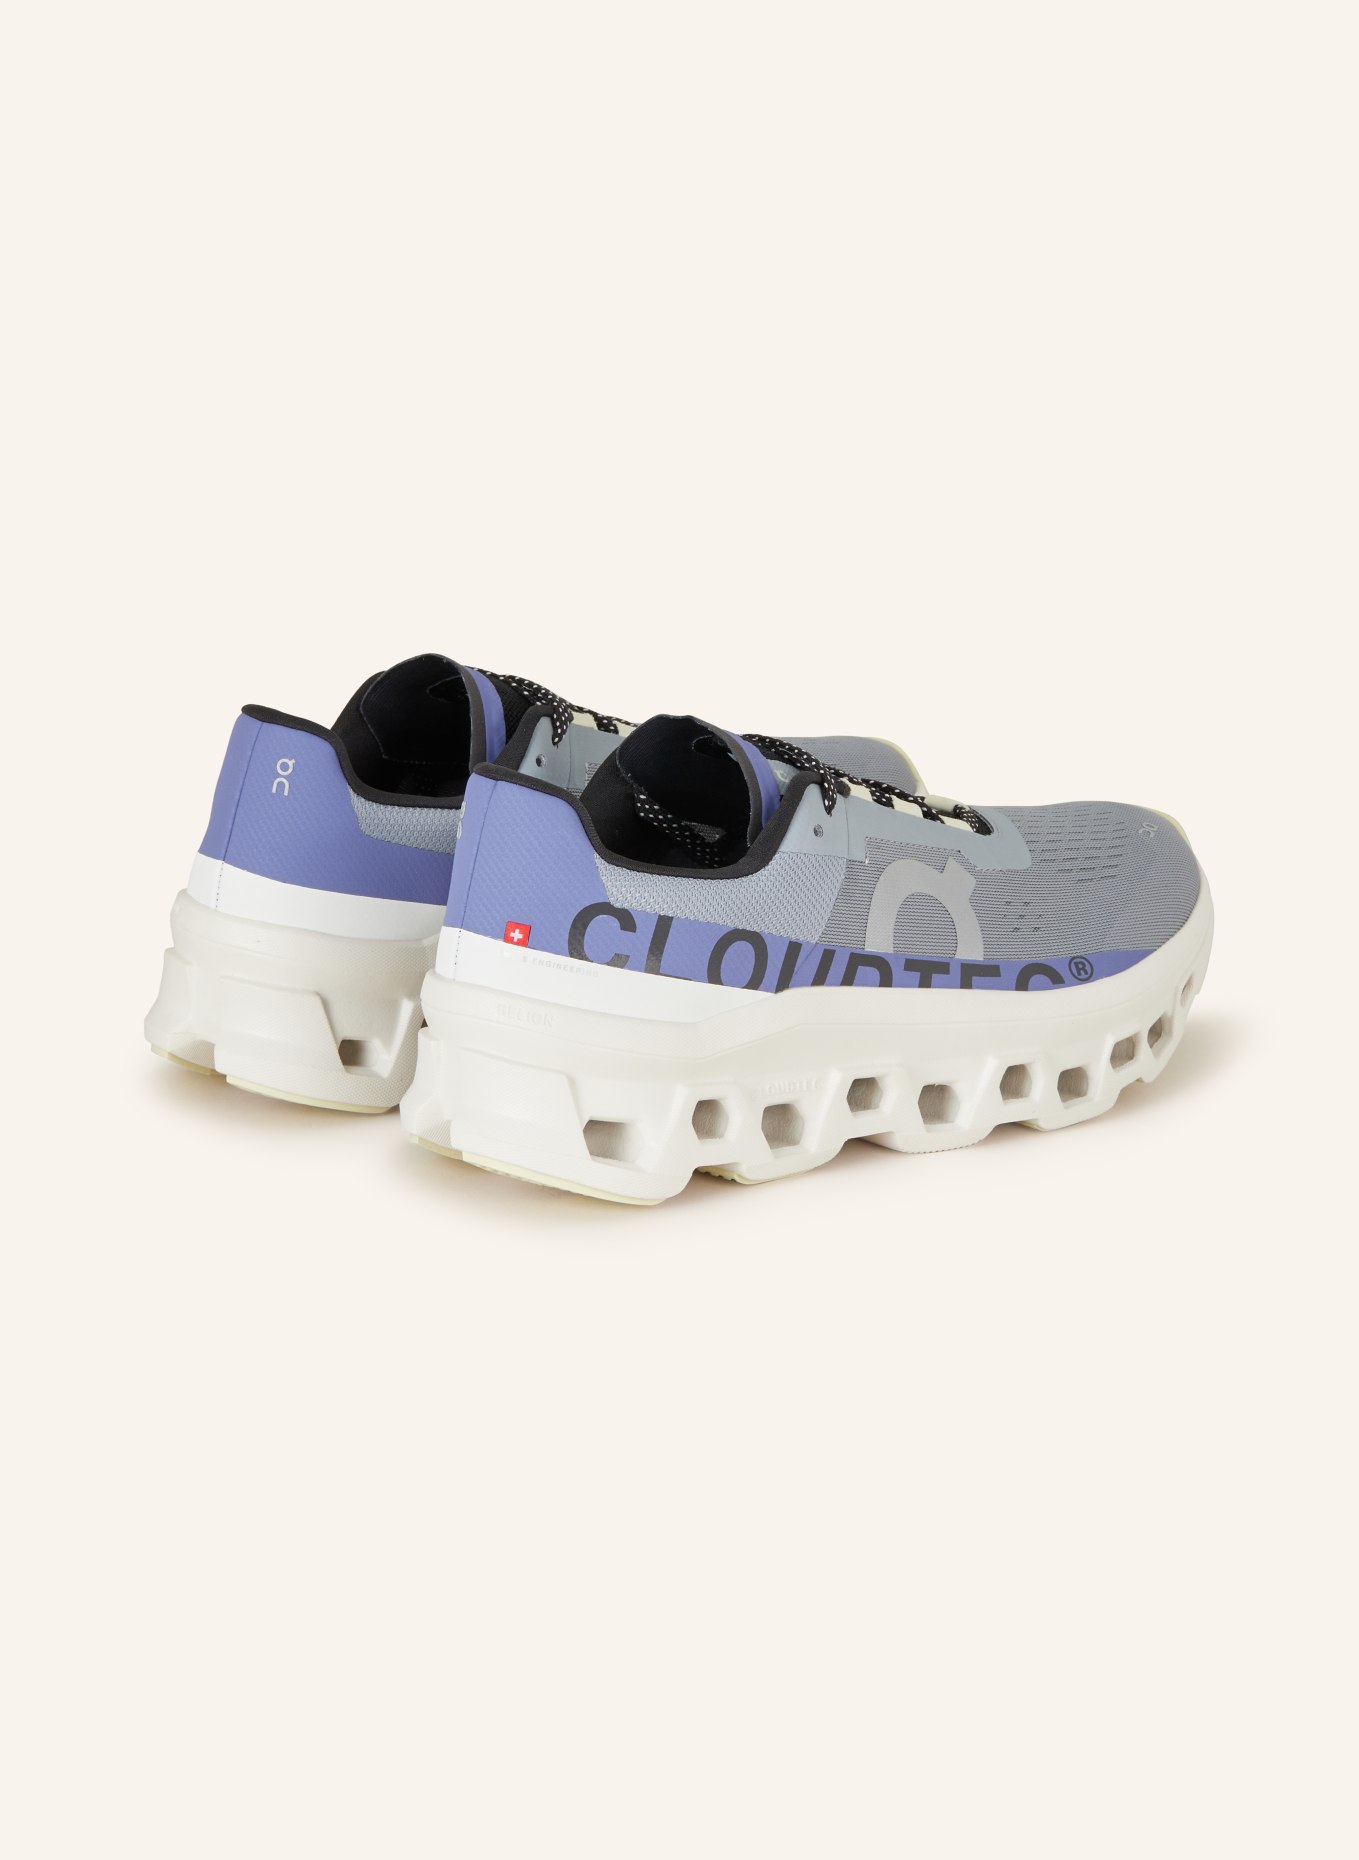 On Sneakers CLOUDMONSTER, Color: BLUE GRAY/ PURPLE (Image 2)